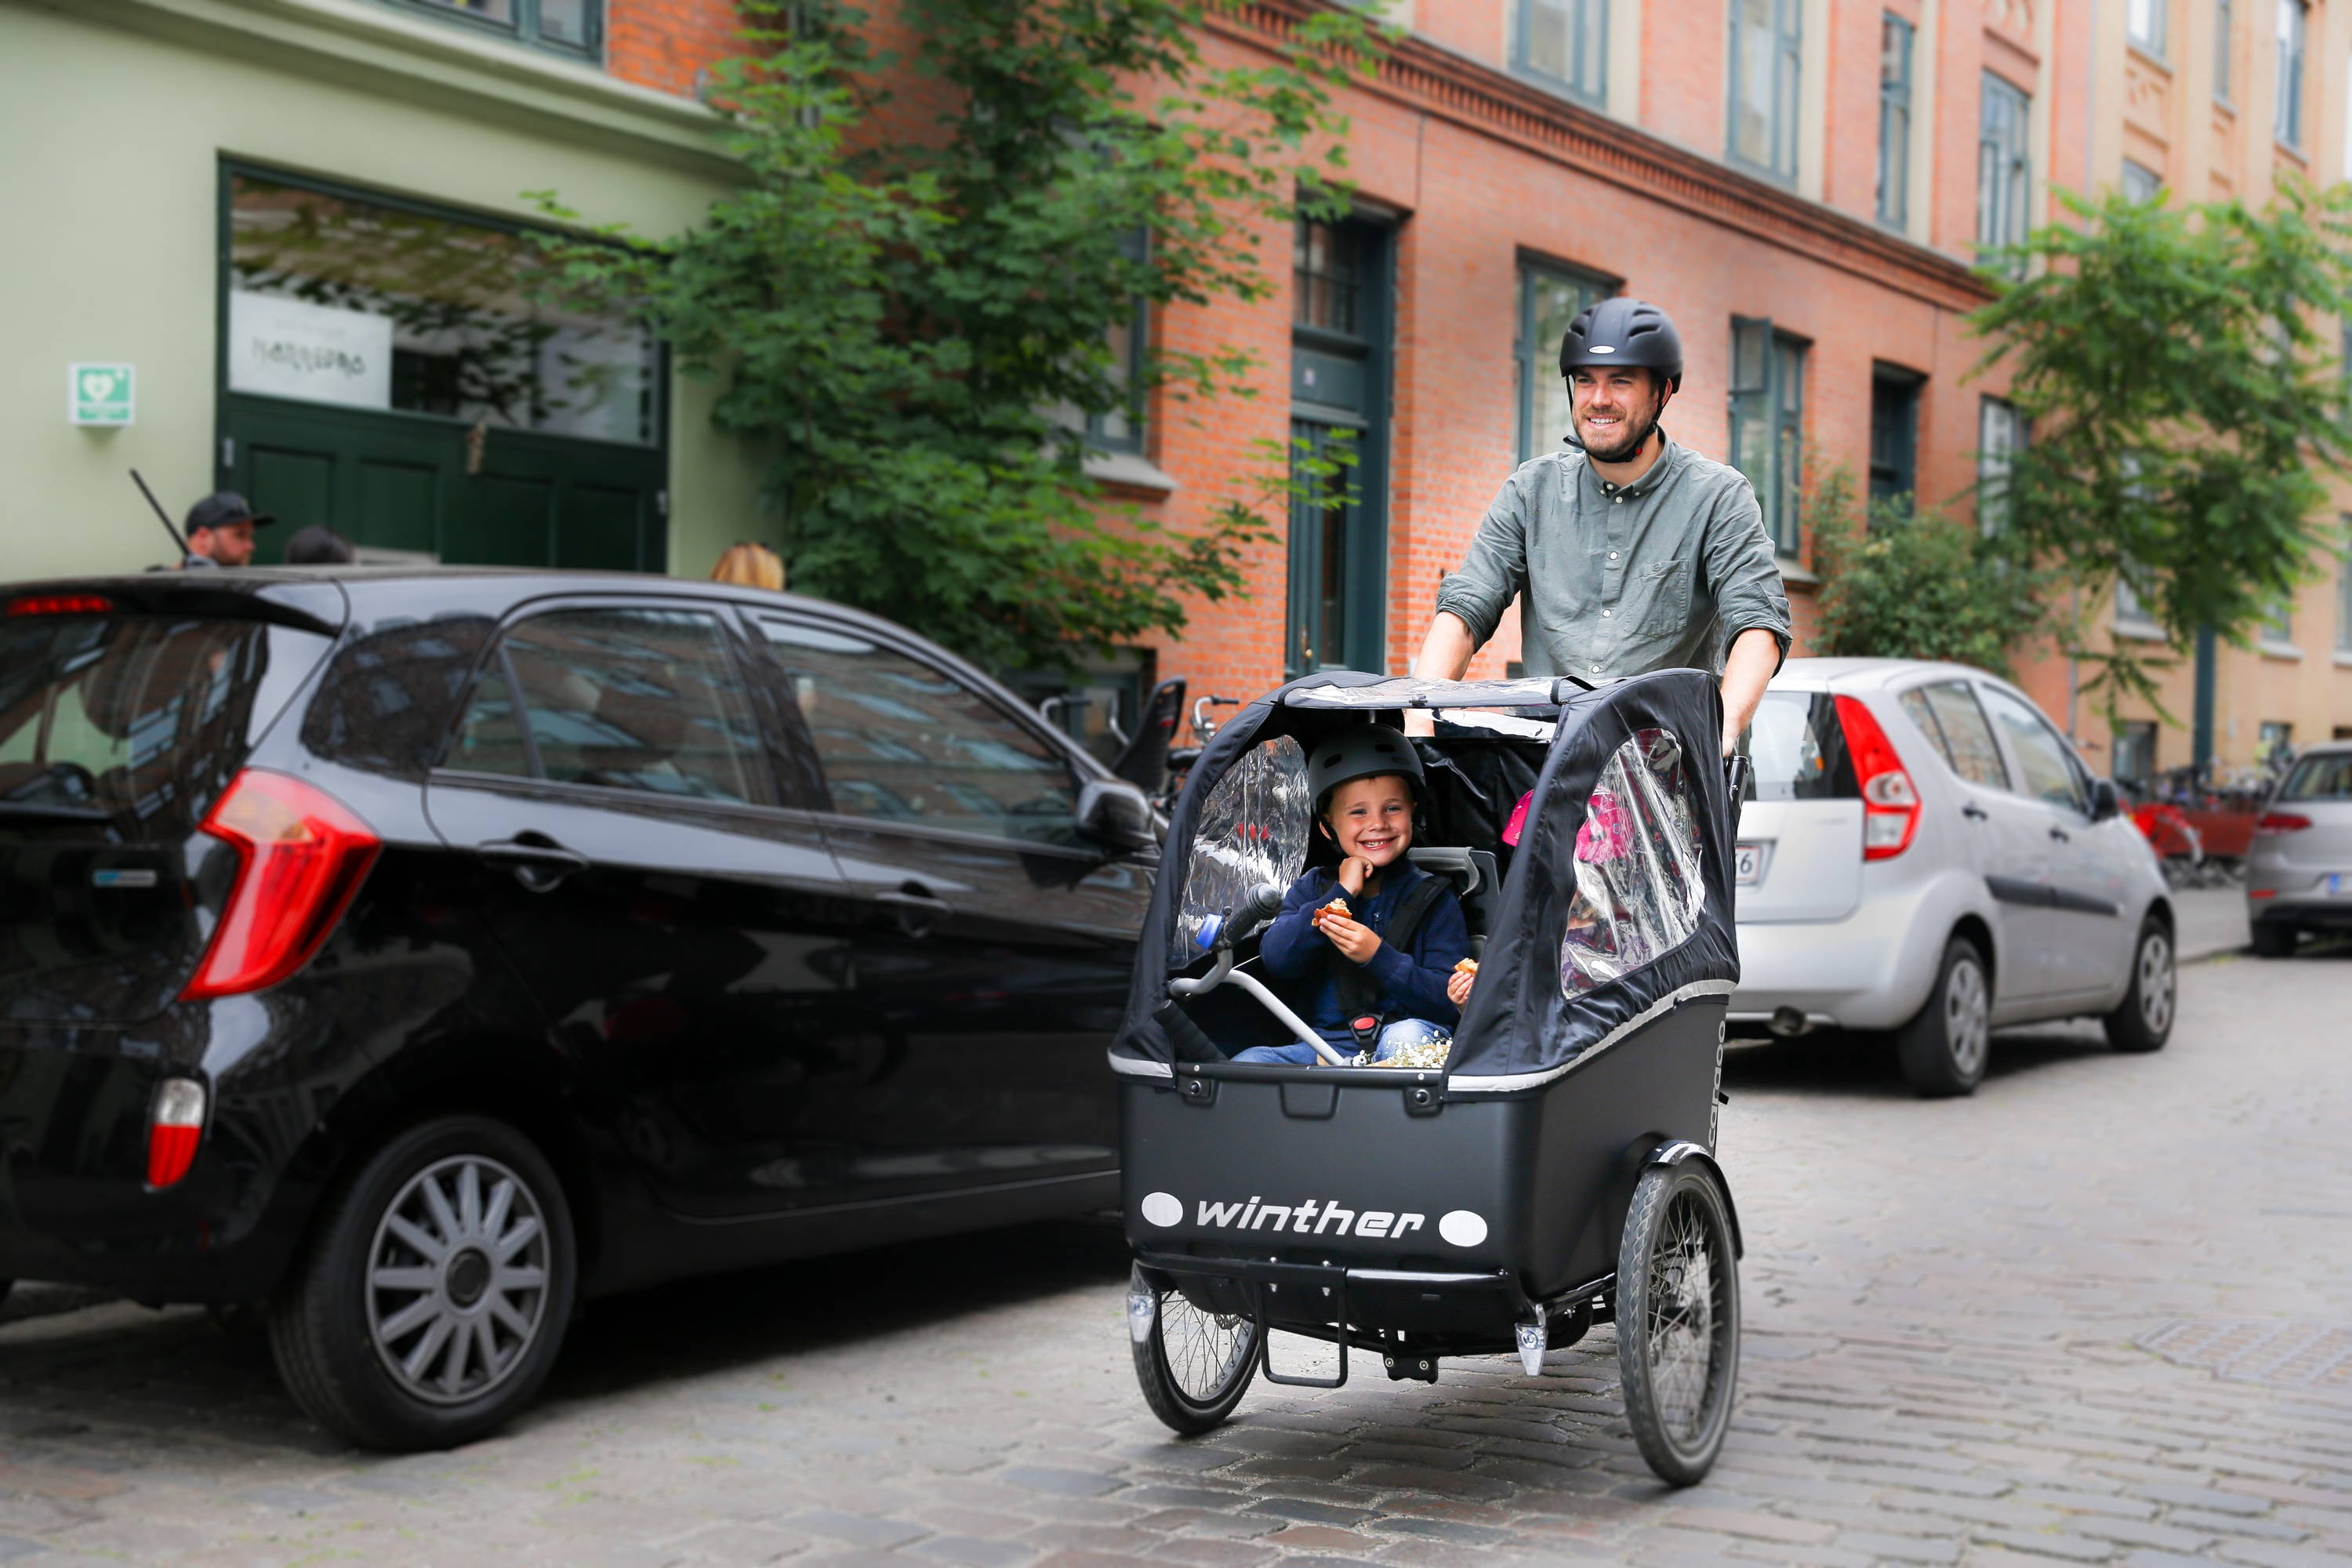 A man rides a Winther cargo bike through a European side-street with a smiling child in the front box.